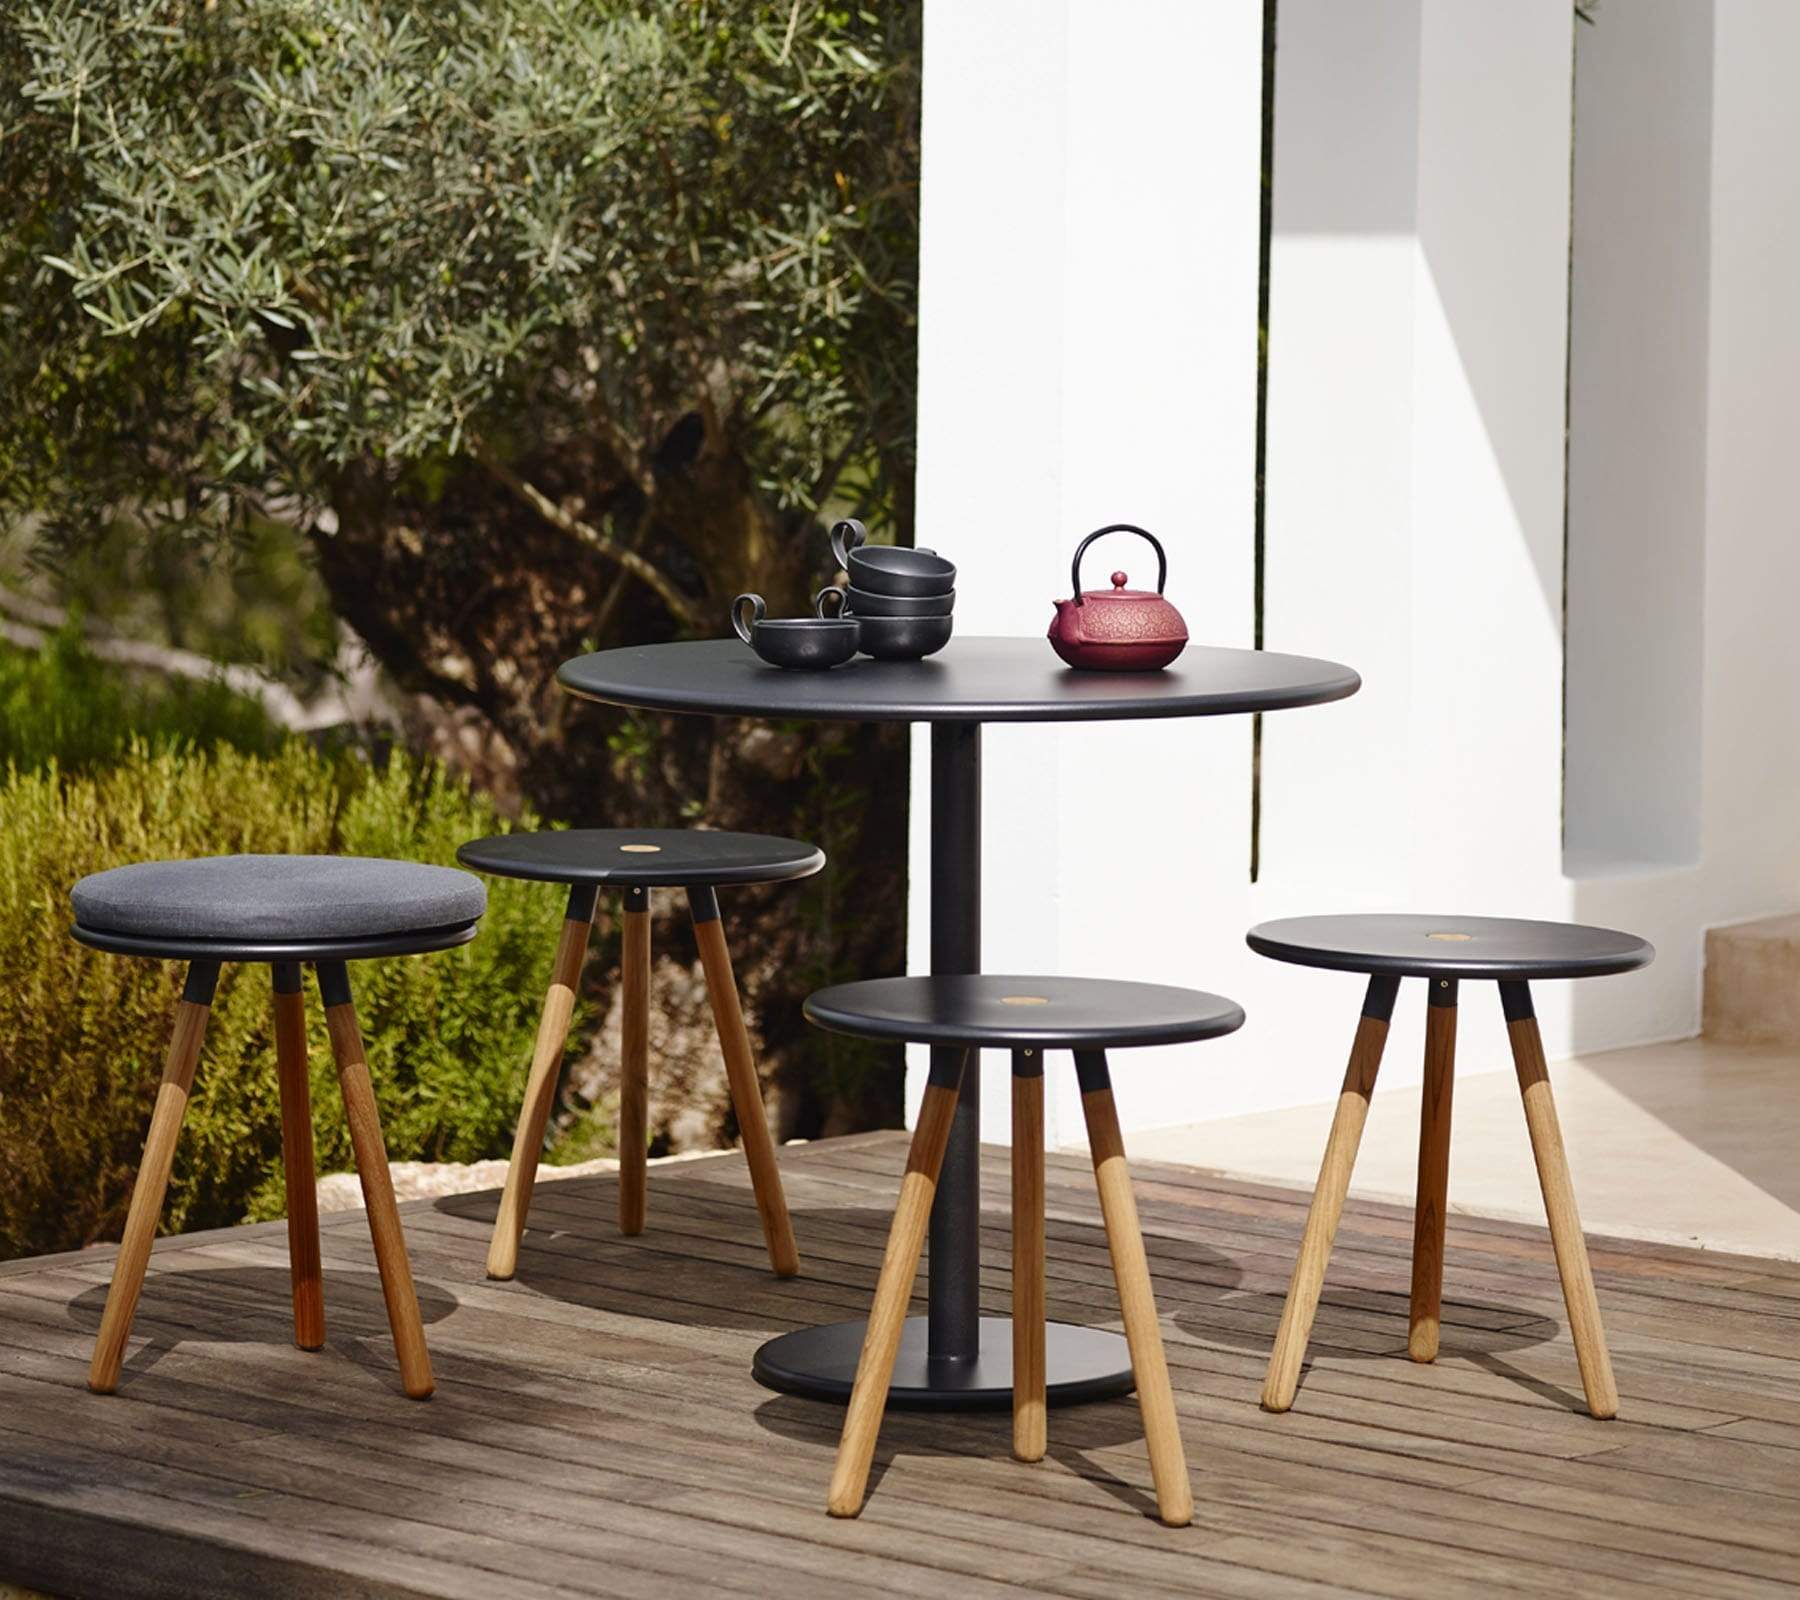 Cane-Line Denmark Outdoor Side Table Cane-Line Area table/stool  11009TAL